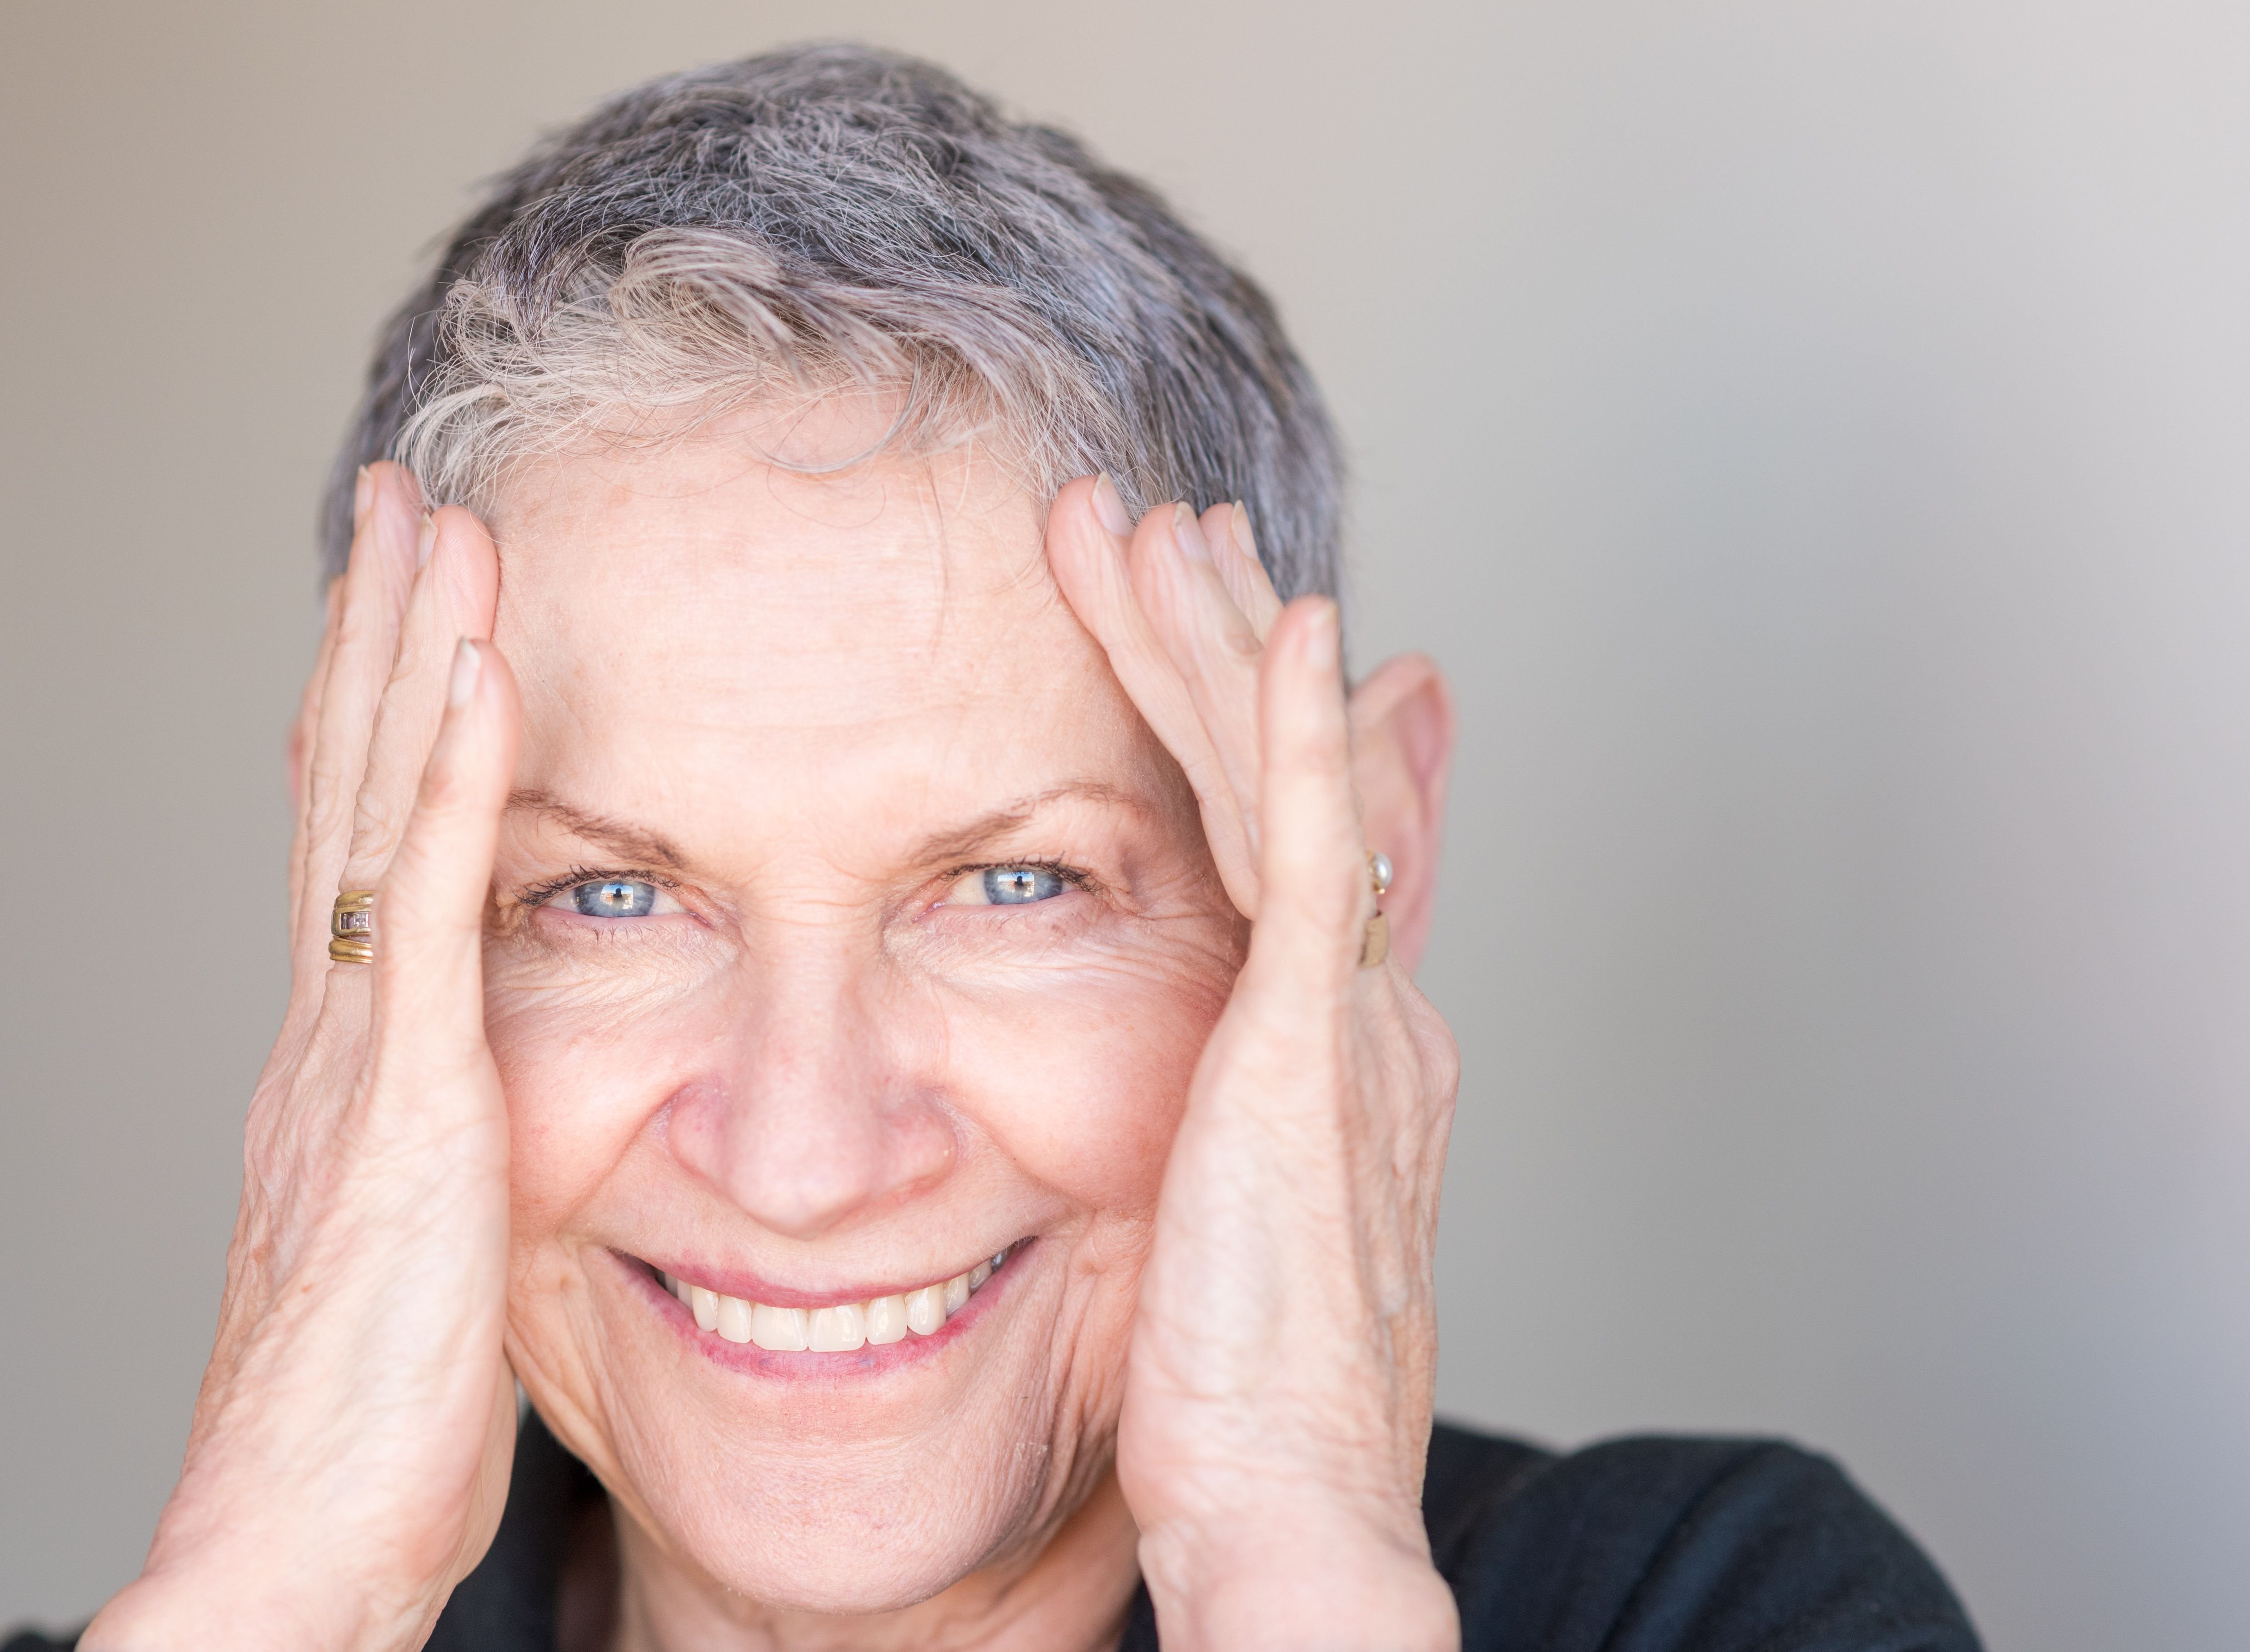 Close up portrait of beautiful older woman with short grey hair smiling with hands around face. | Source: Shutterstock